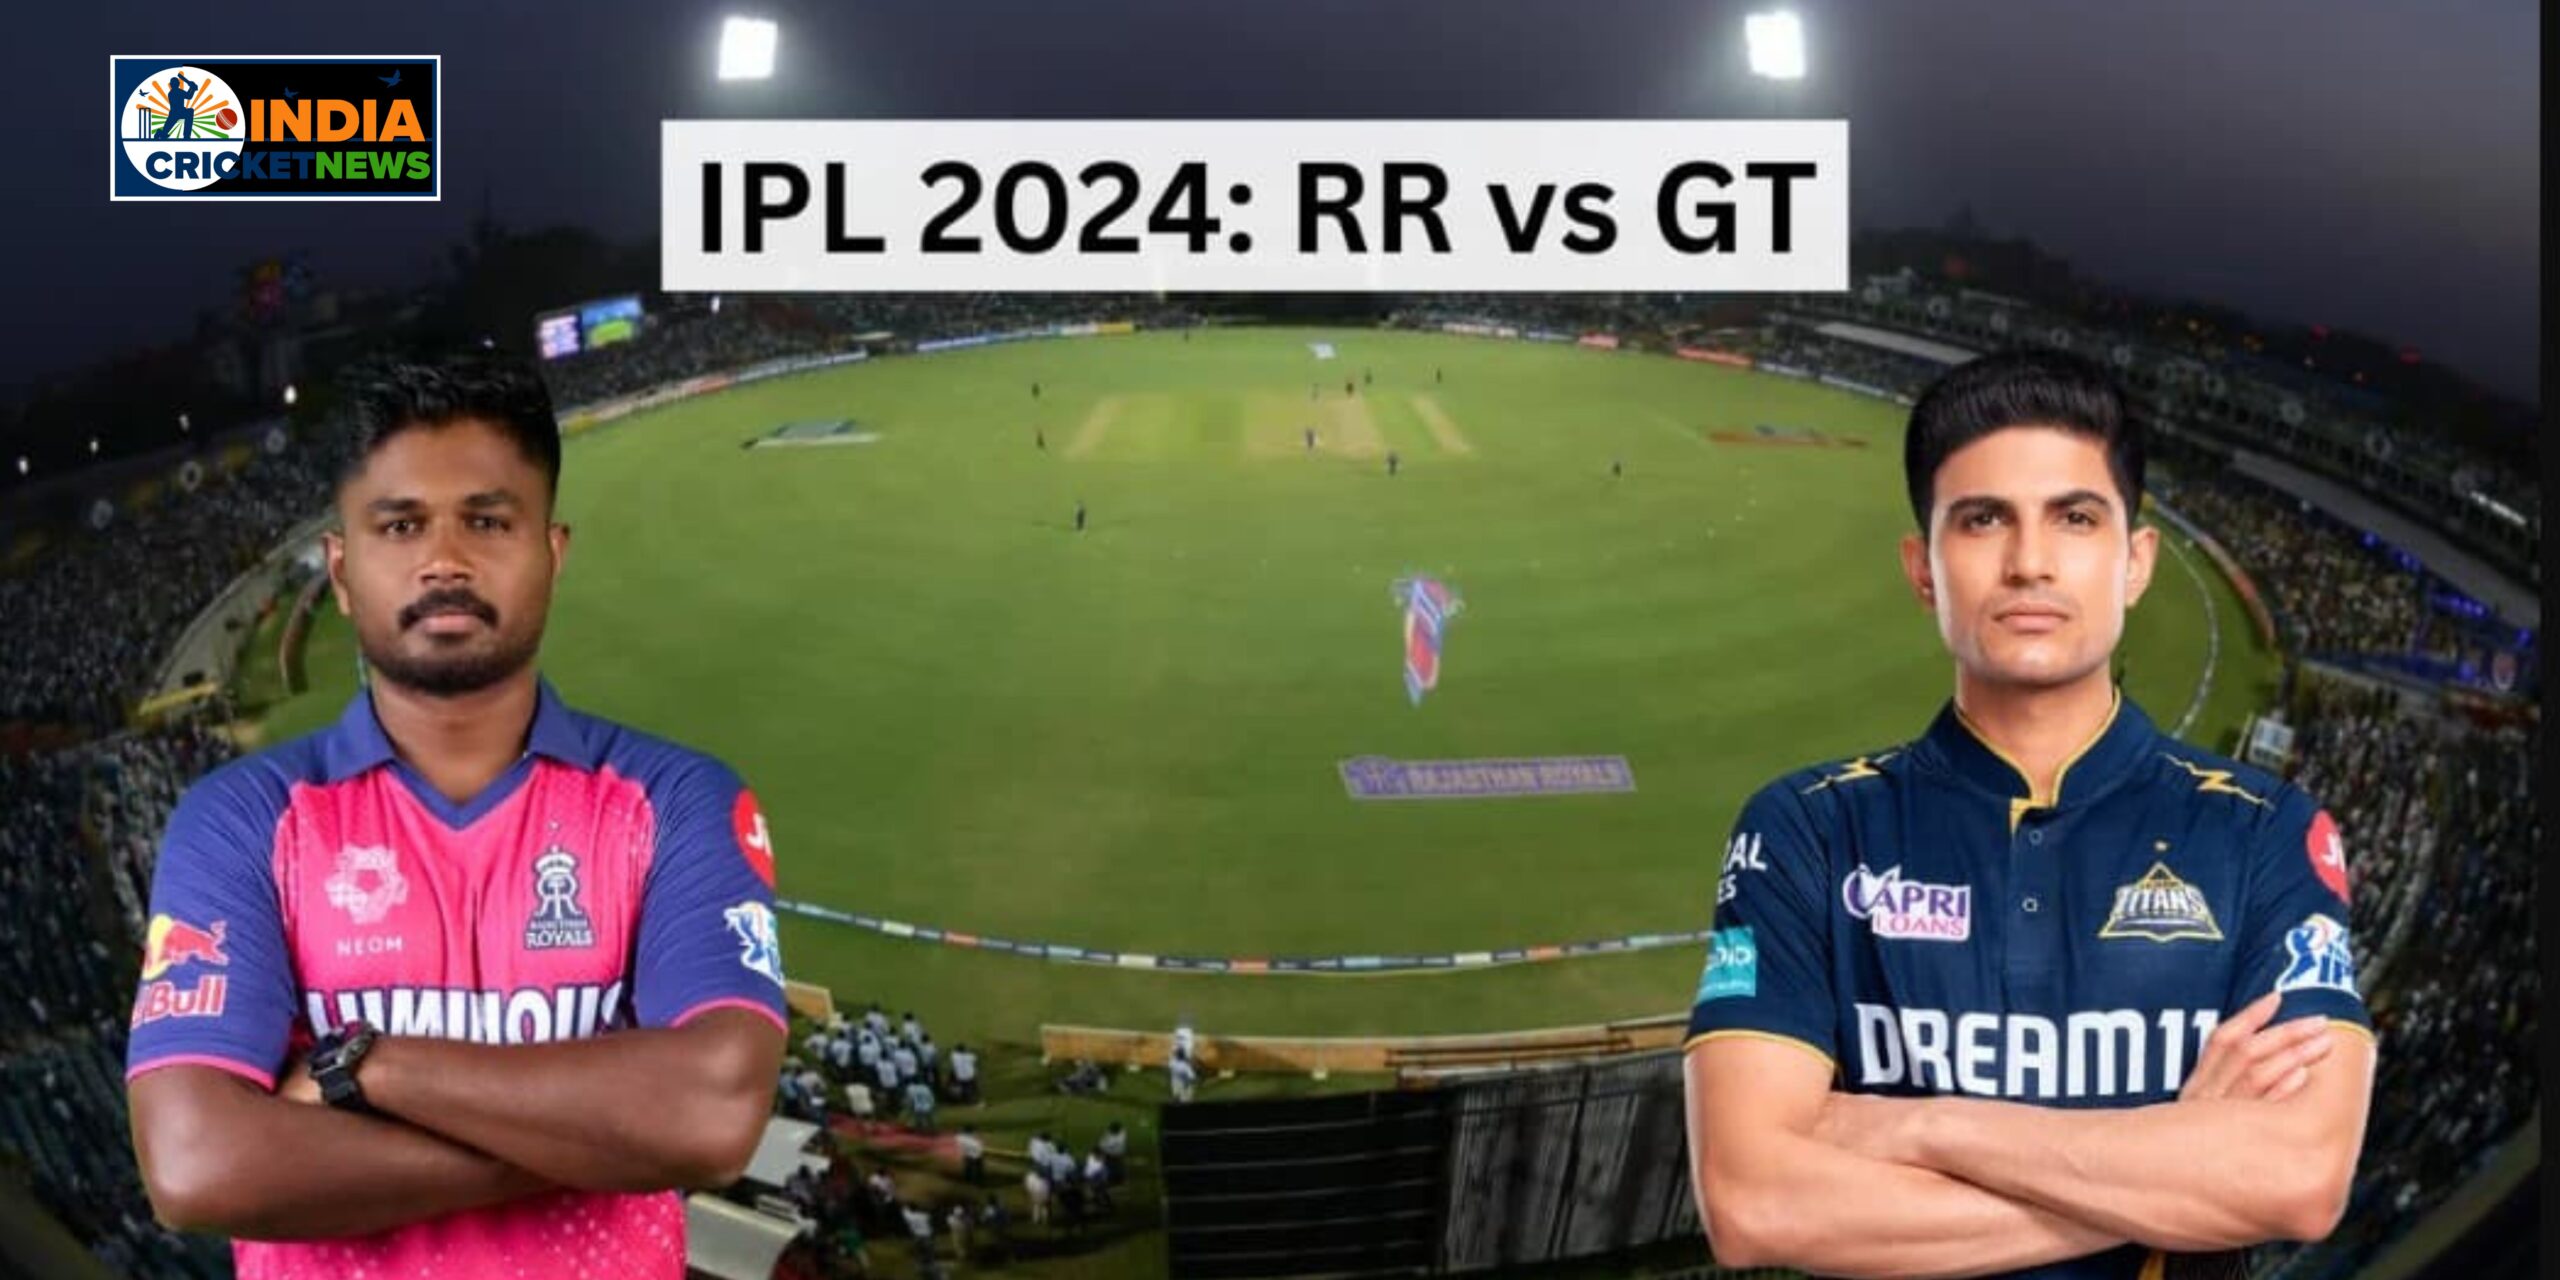 Get here all the details about today’s IPL match between Rajasthan and Gujarat